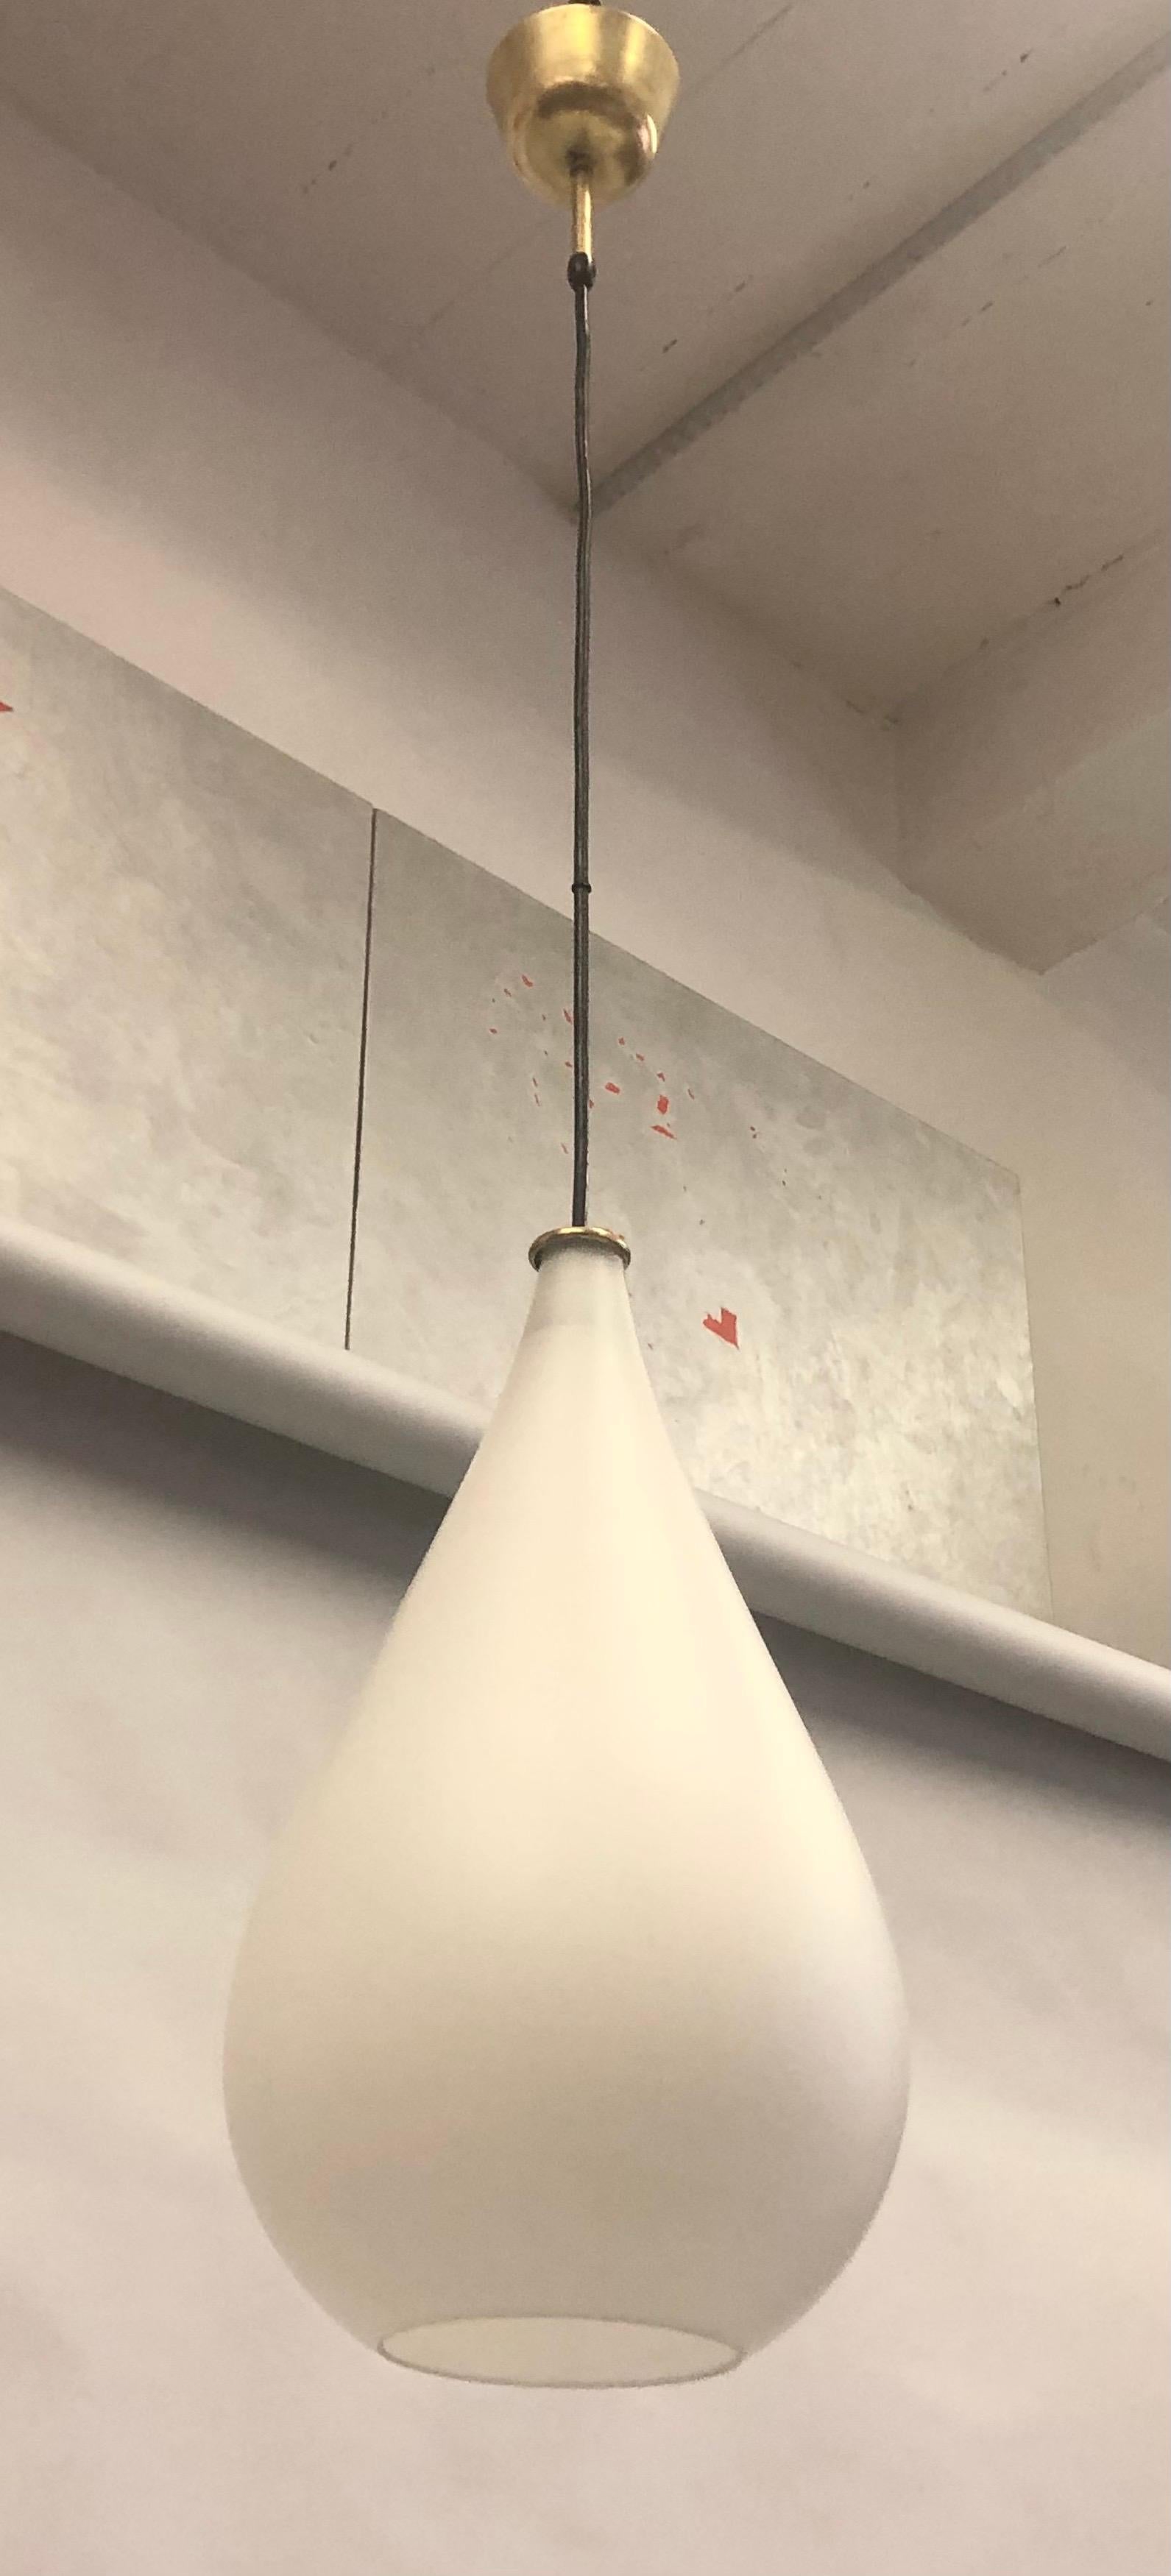 A Timeless Italian Mid-Century Modern mold blown glass pendant / chandelier or lantern in the form of a teardrop by Max Ingrand for Fontana Arte. The piece is elegantly blown into sensuous tear drop form in satin frosted glass. It is finished with